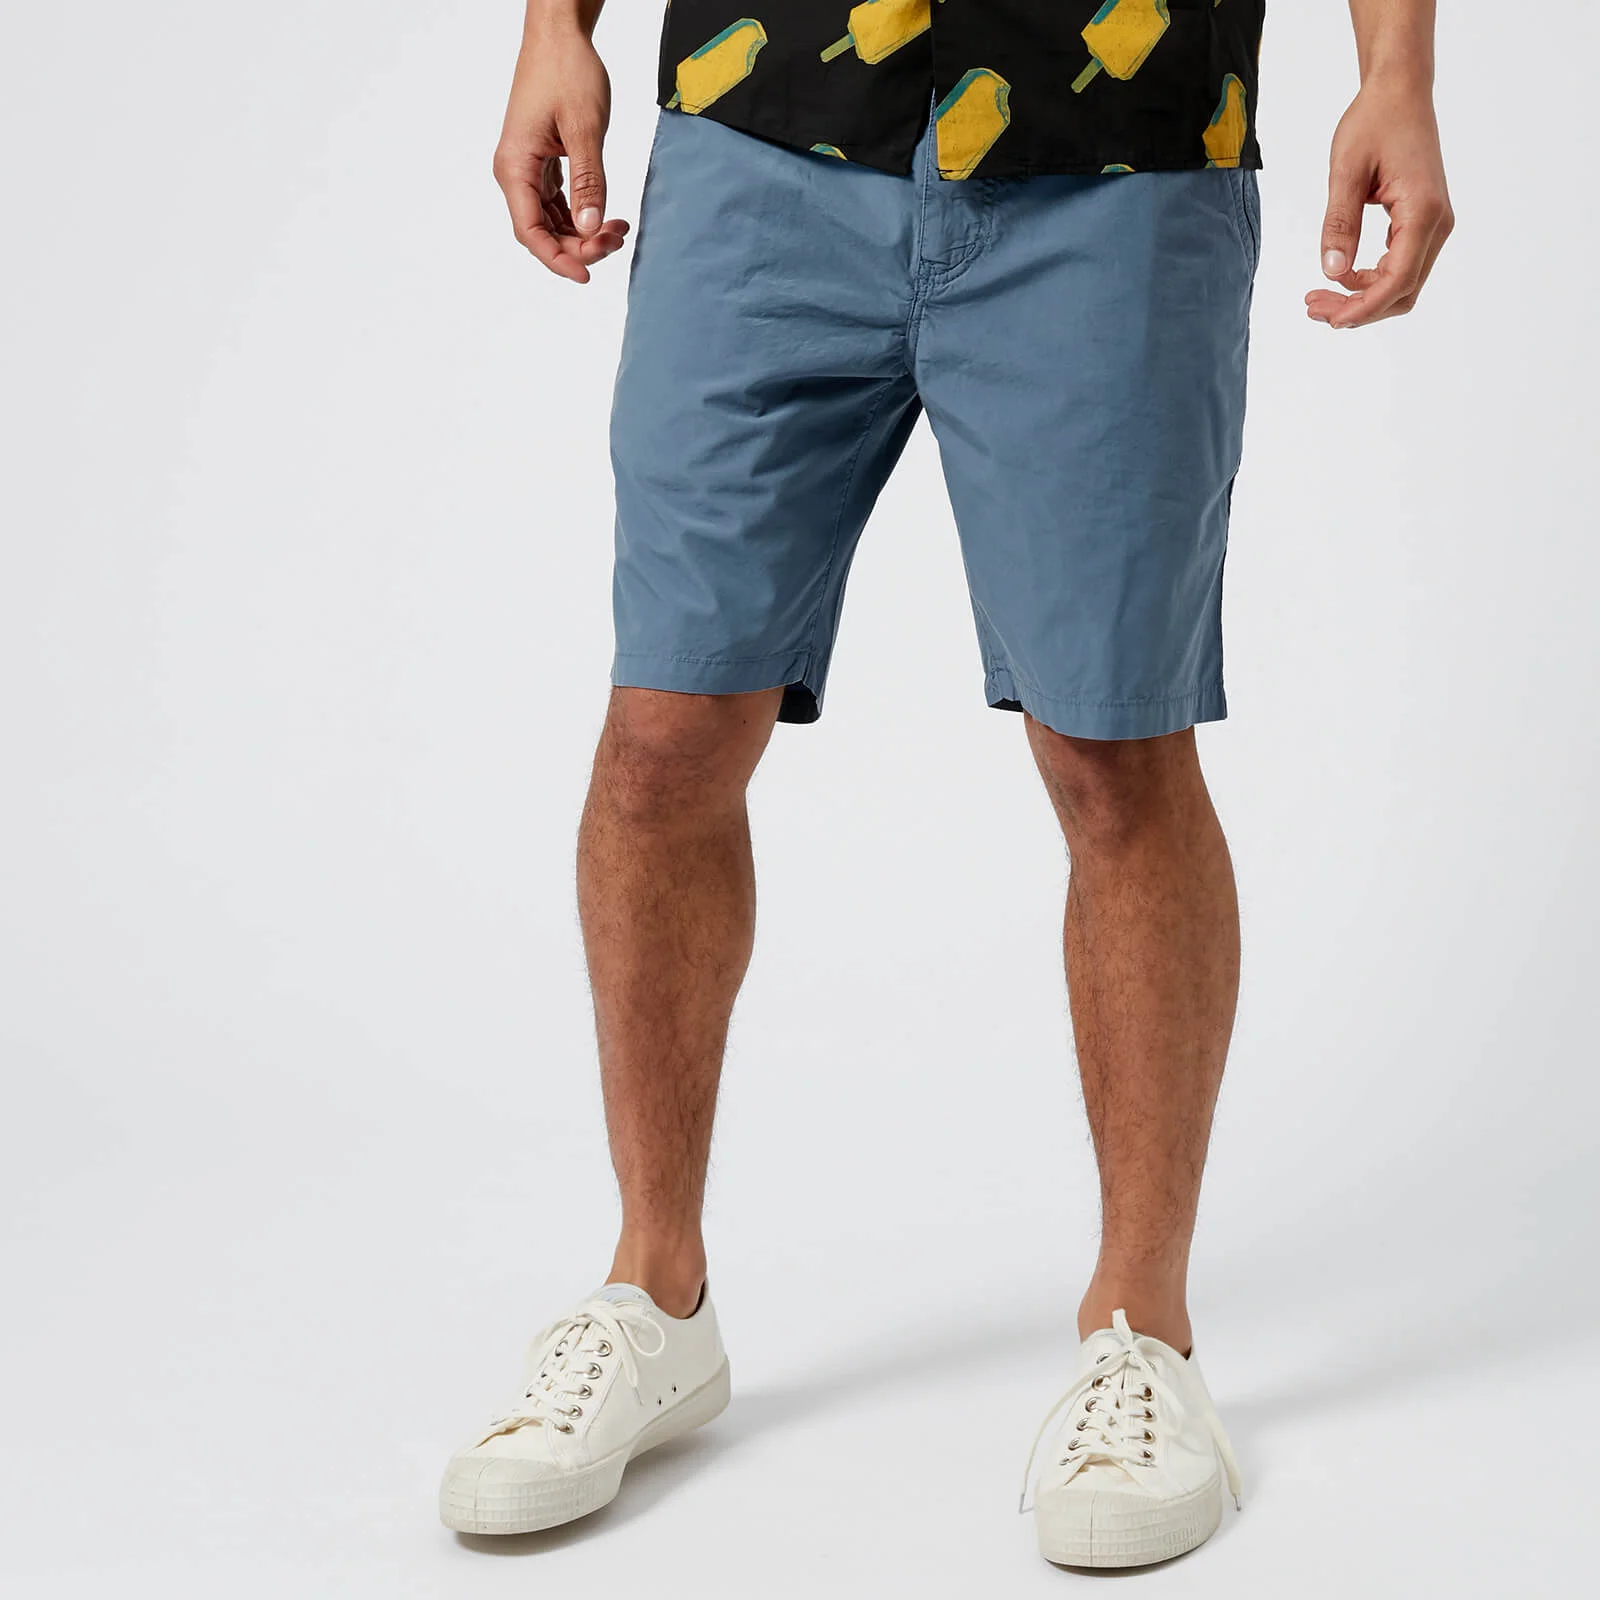 PS by Paul Smith Men's Standard Fit Shorts - Pale Blue Image 1